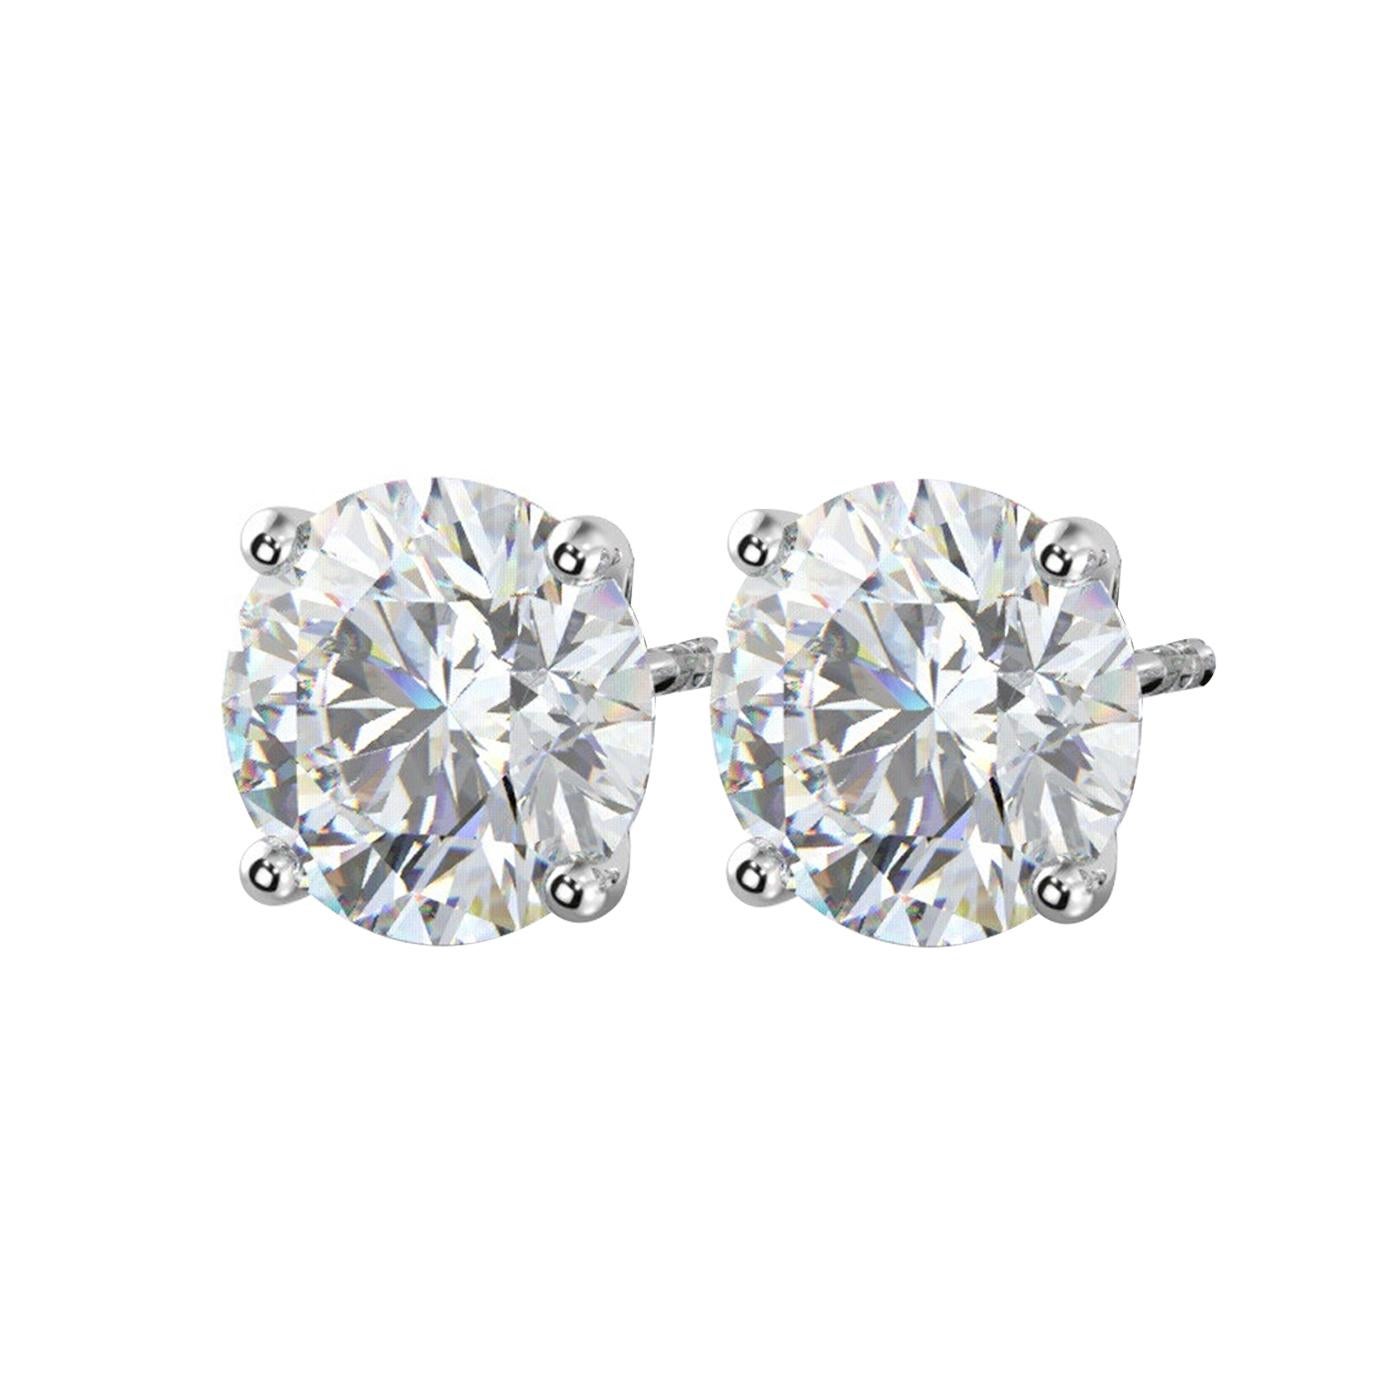 Modernist 4.74ct Natural Round Diamond 4-Prong Martini Setting Stud Earrings Screw Back For Sale